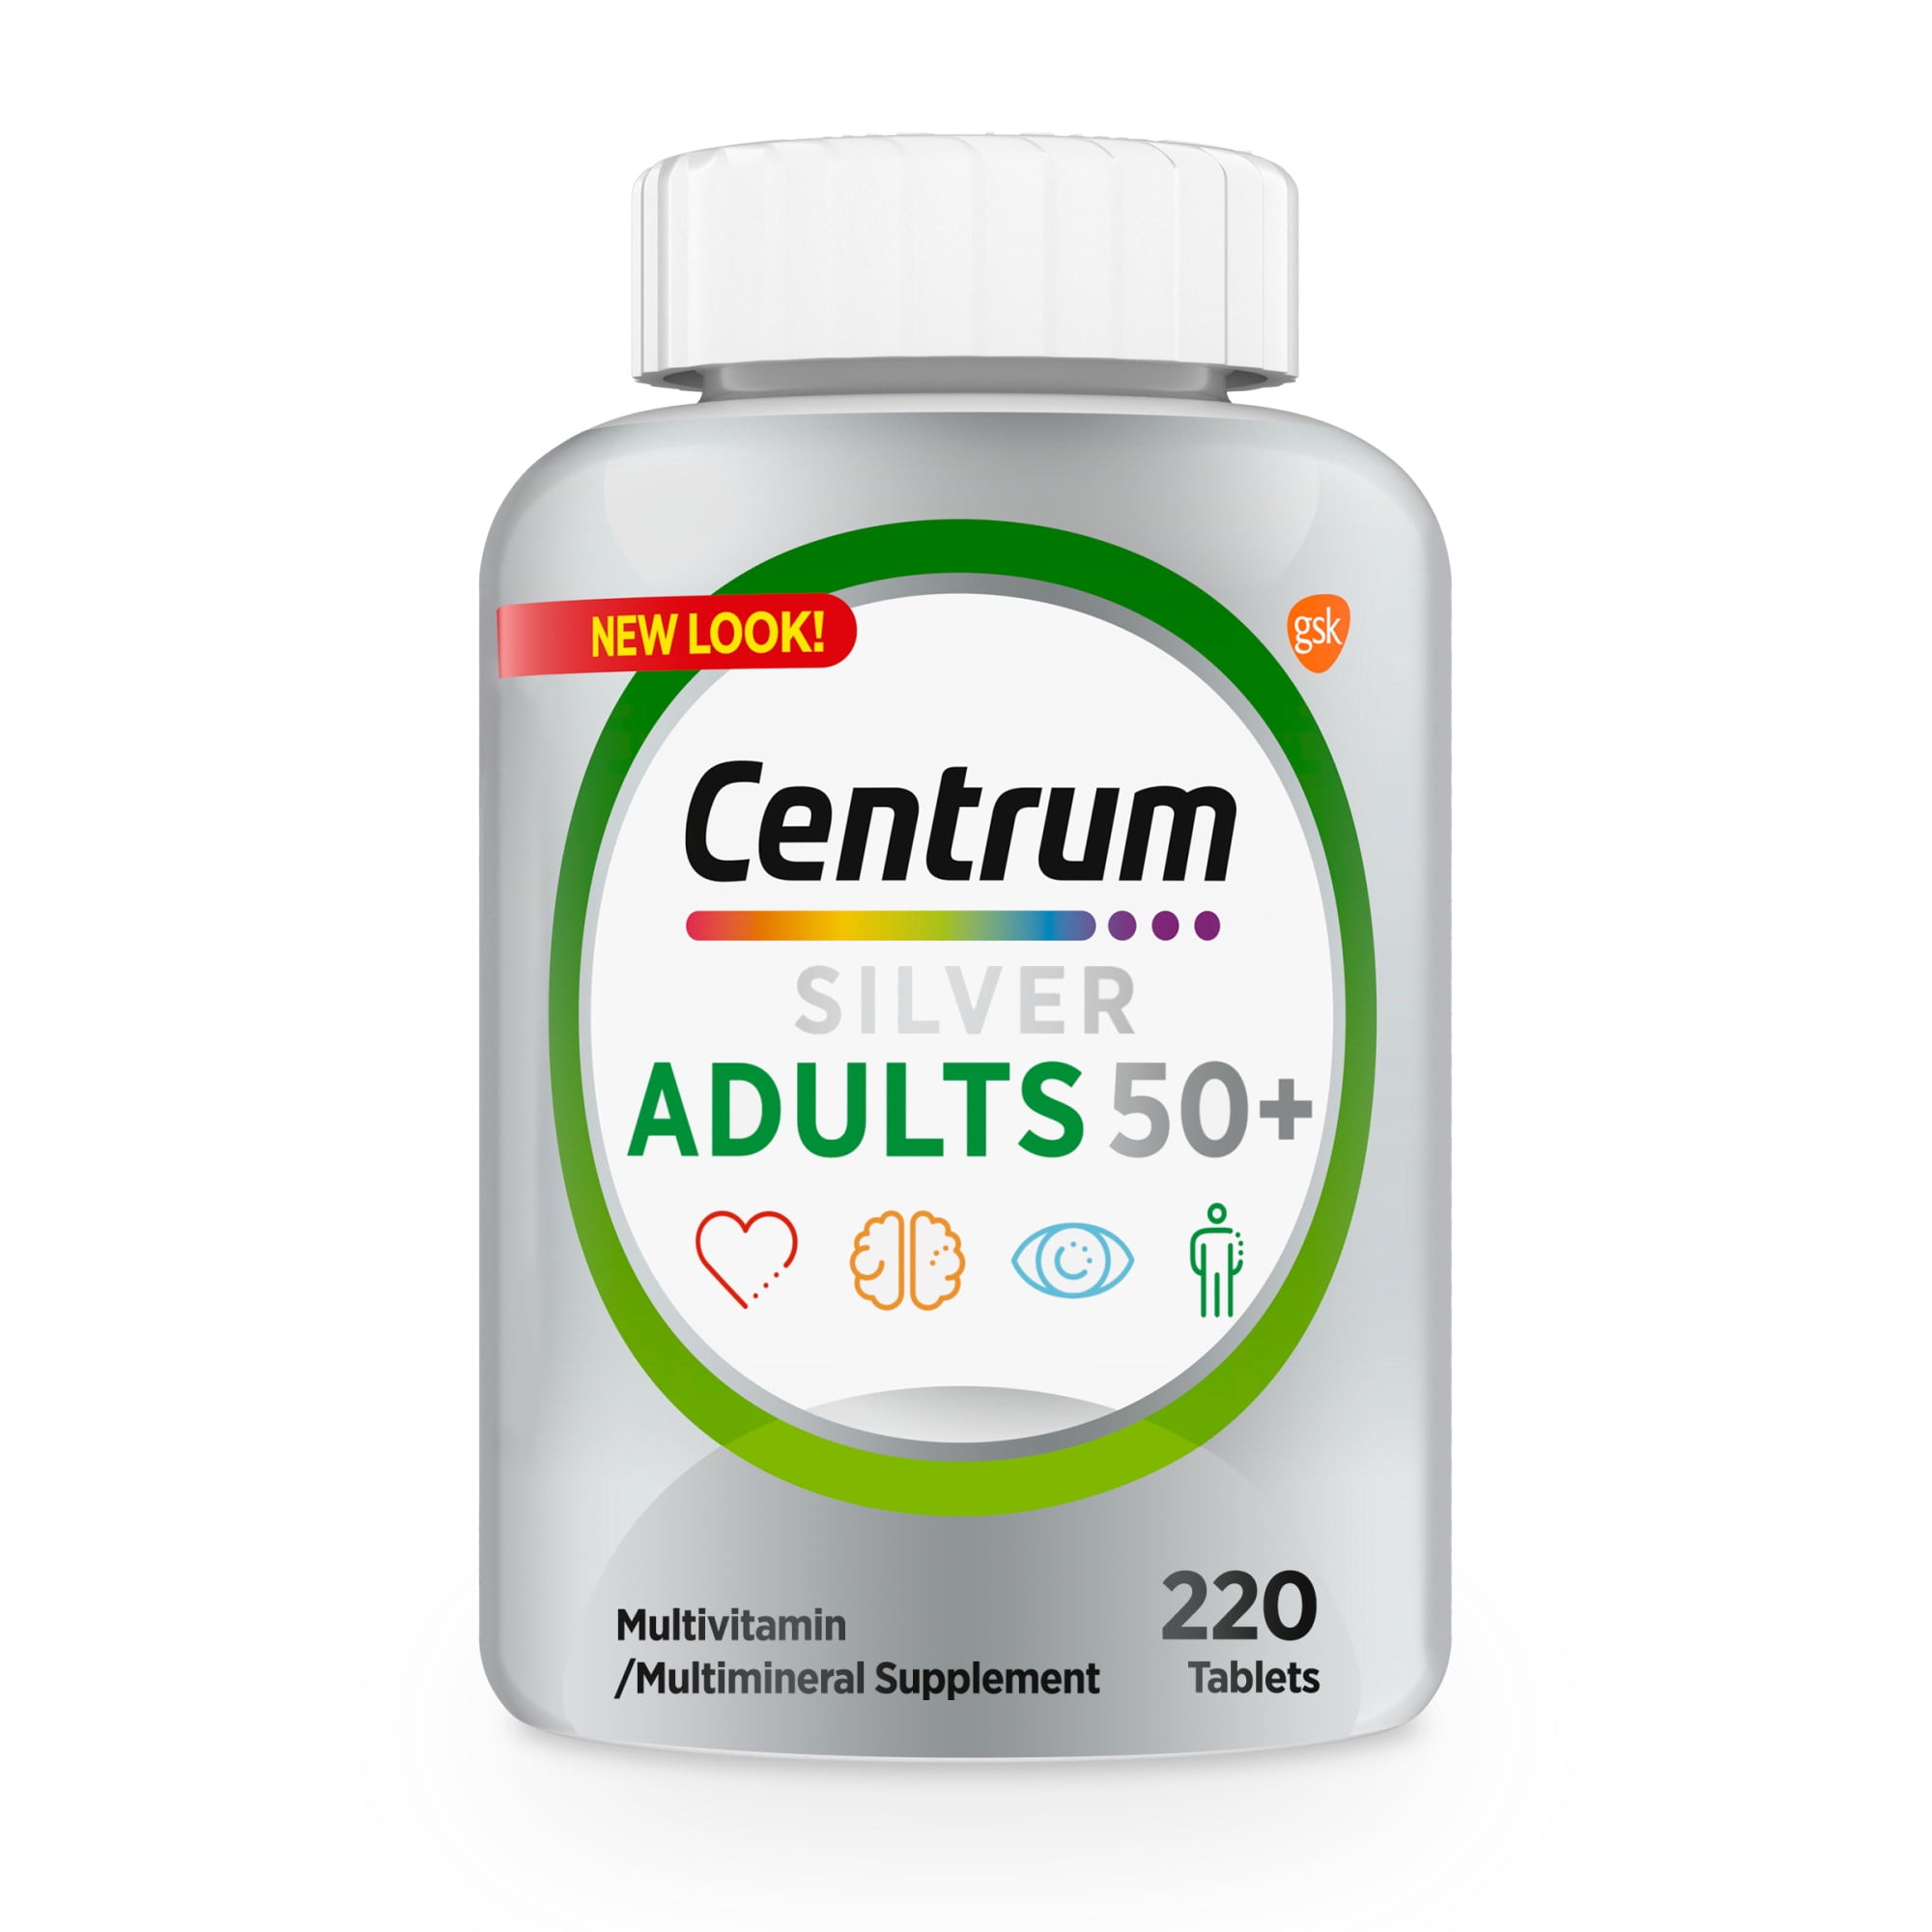 Centrum Silver Multivitamin for Adults 50 Plus, Multimineral Supplement, Supports Memory and Cognition In Older Adults - 220 Ct